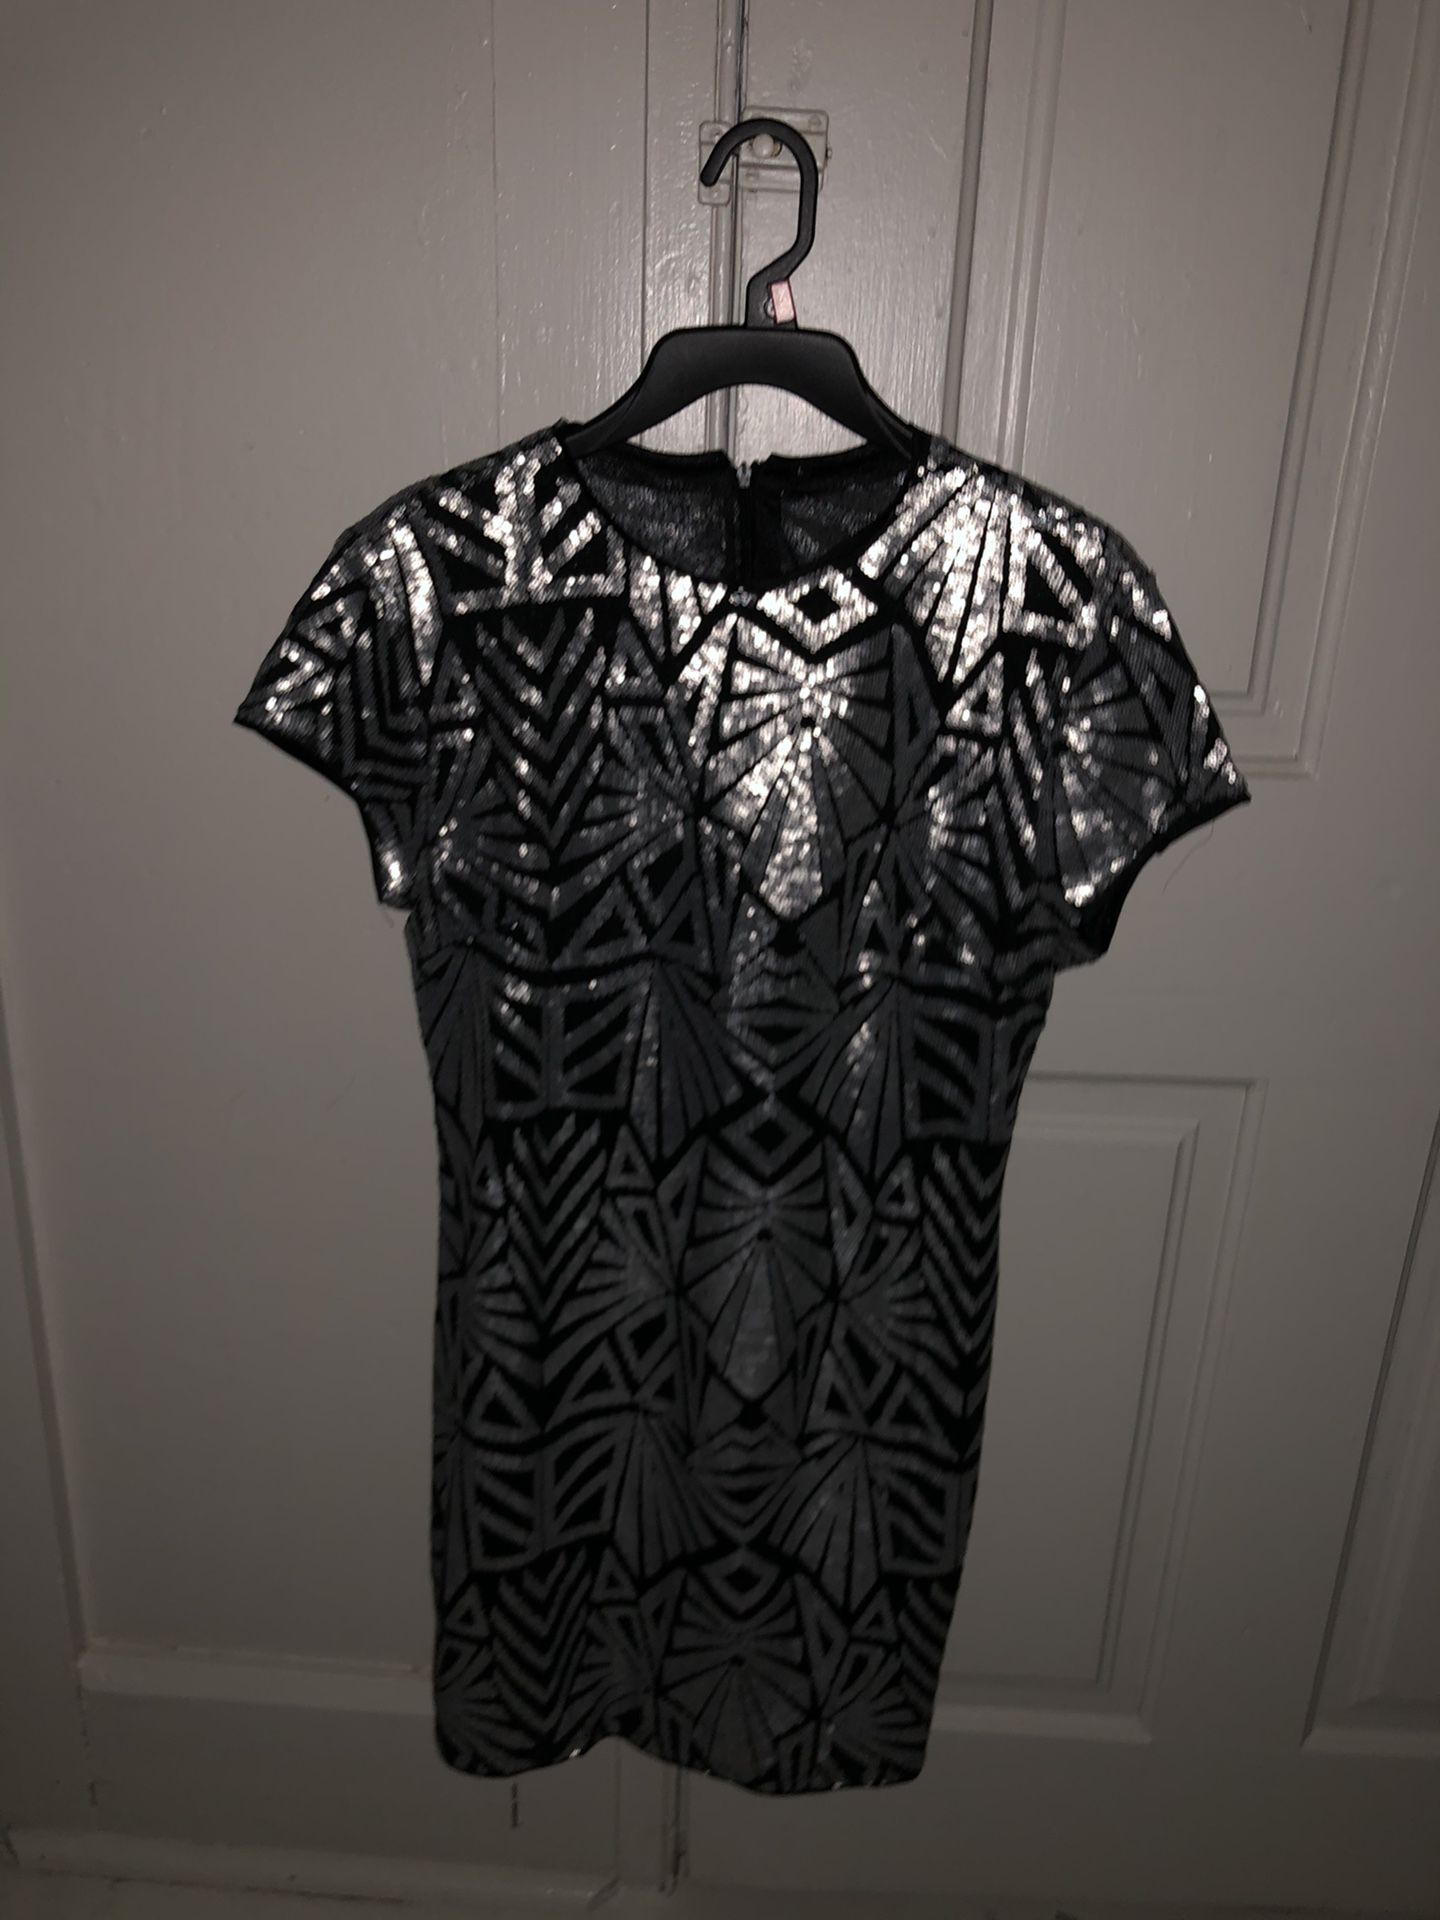 Dress - Black with Silver sequined motif - Mini-Dress